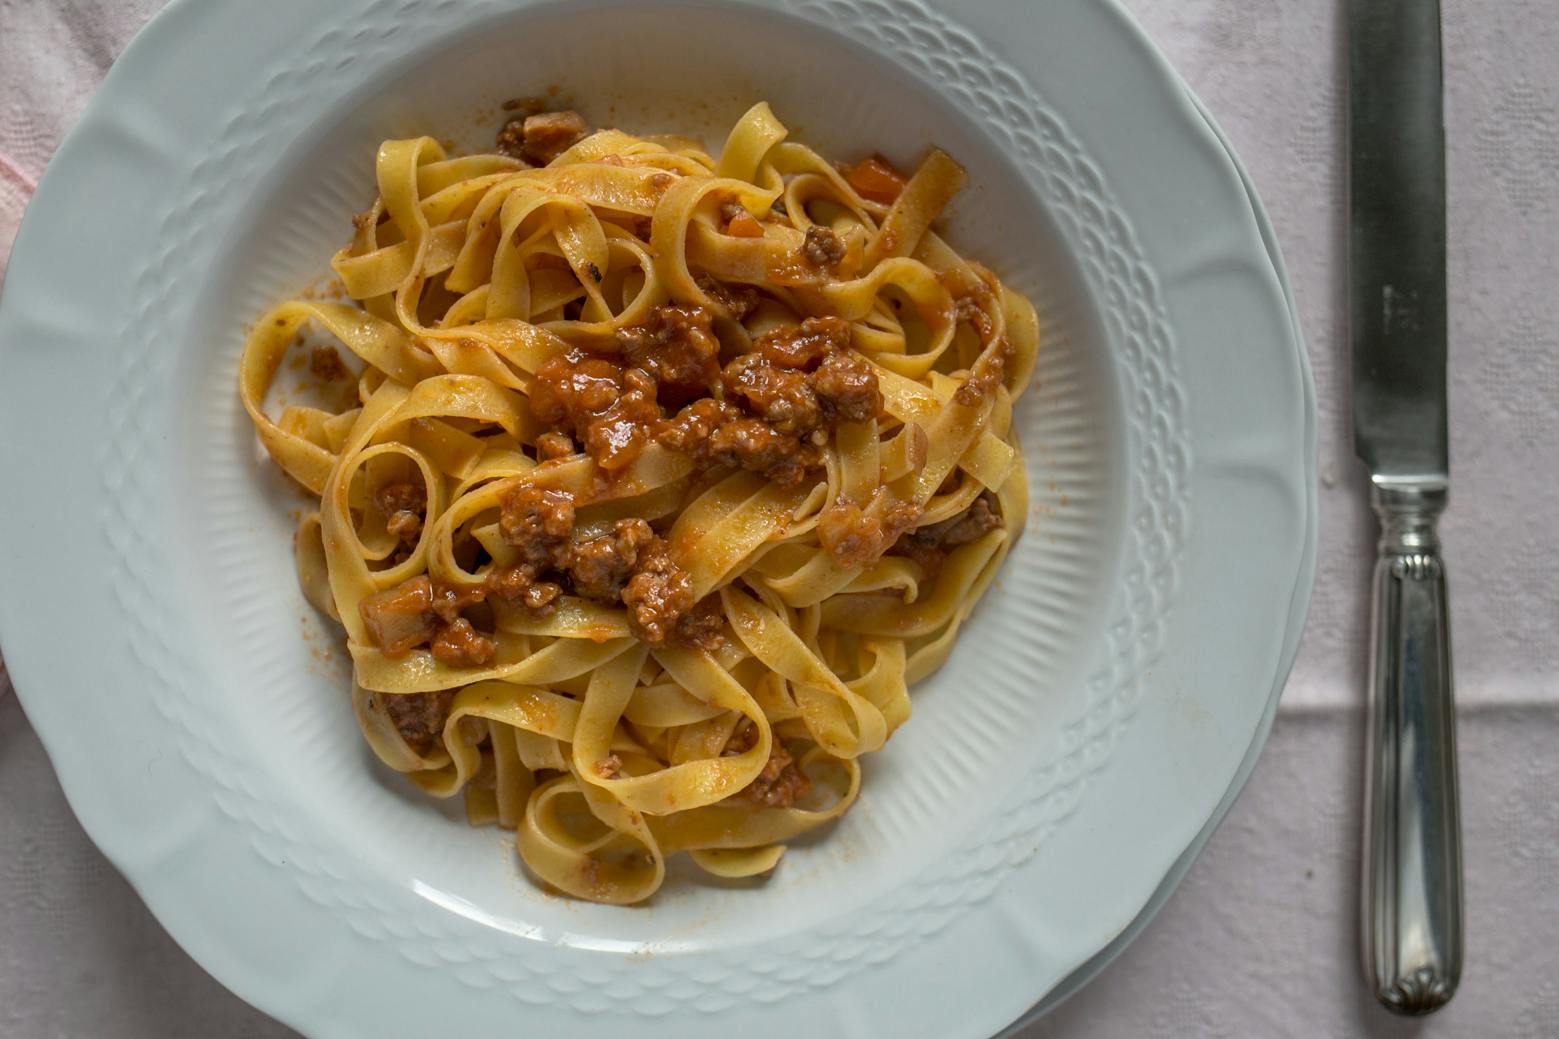 Plate with tagliatelle with ragout sauce